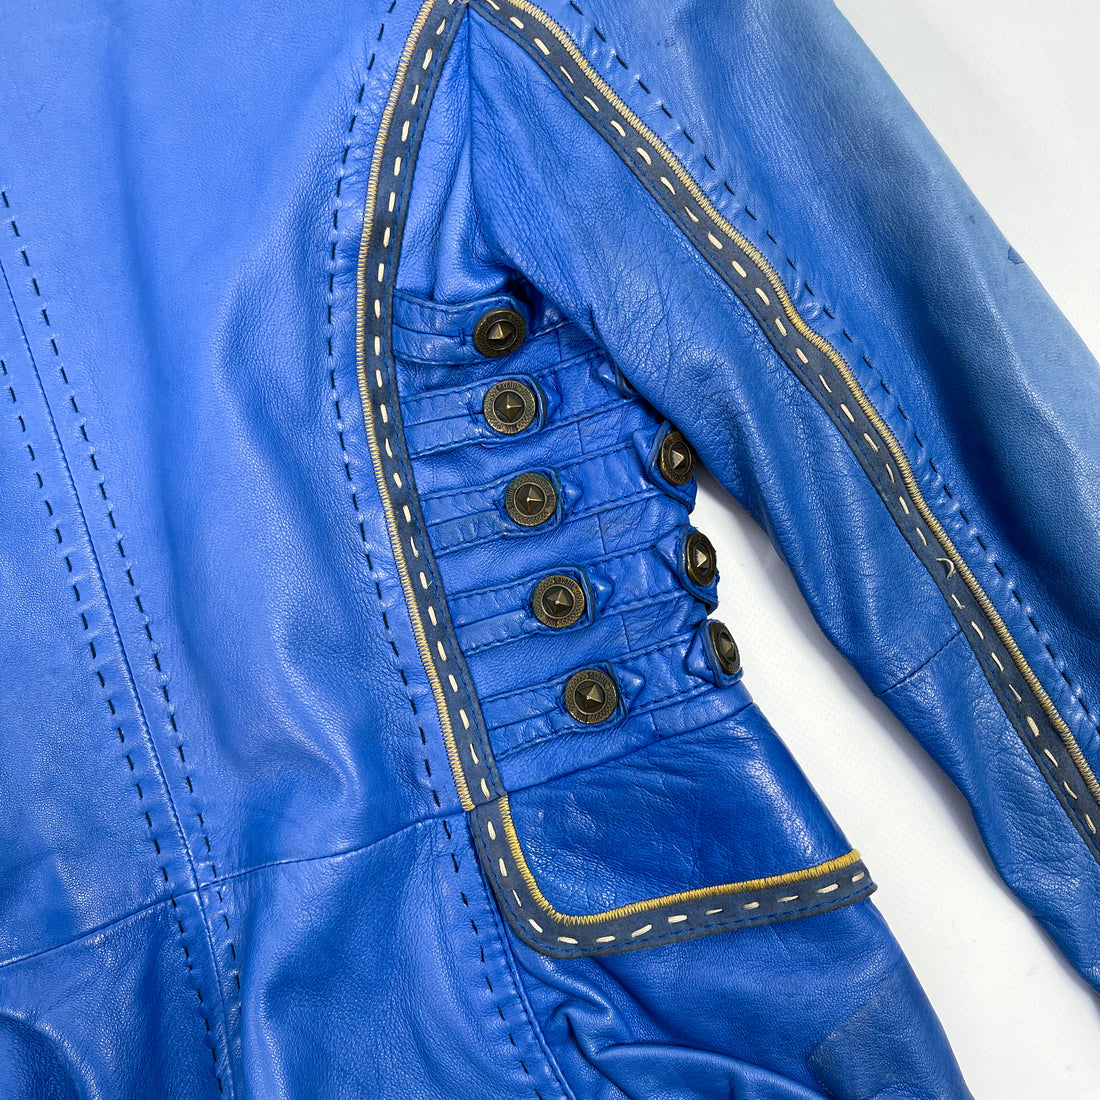 Roberto Cavalli Blue Leather Cropped Jacket 1990's